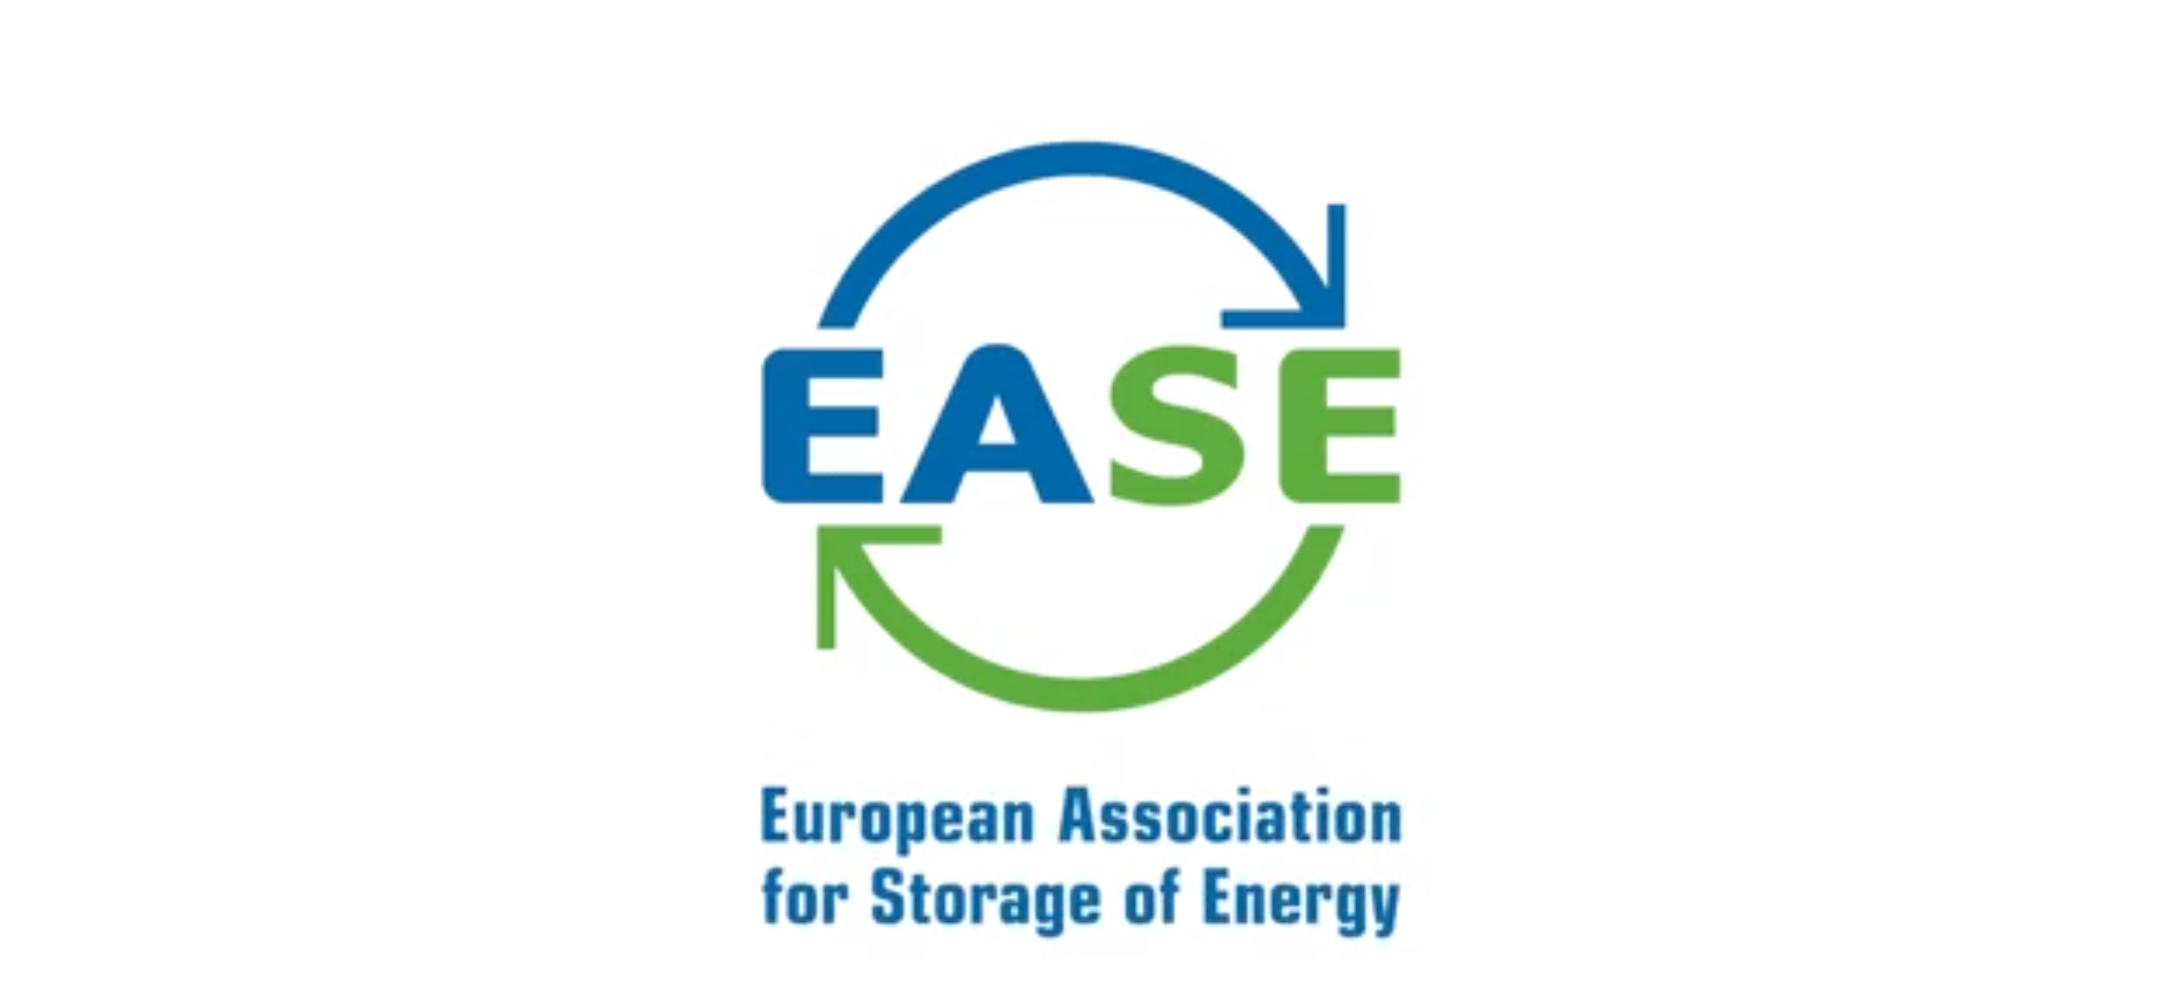 A Comprehensive Approach to Energy Storage